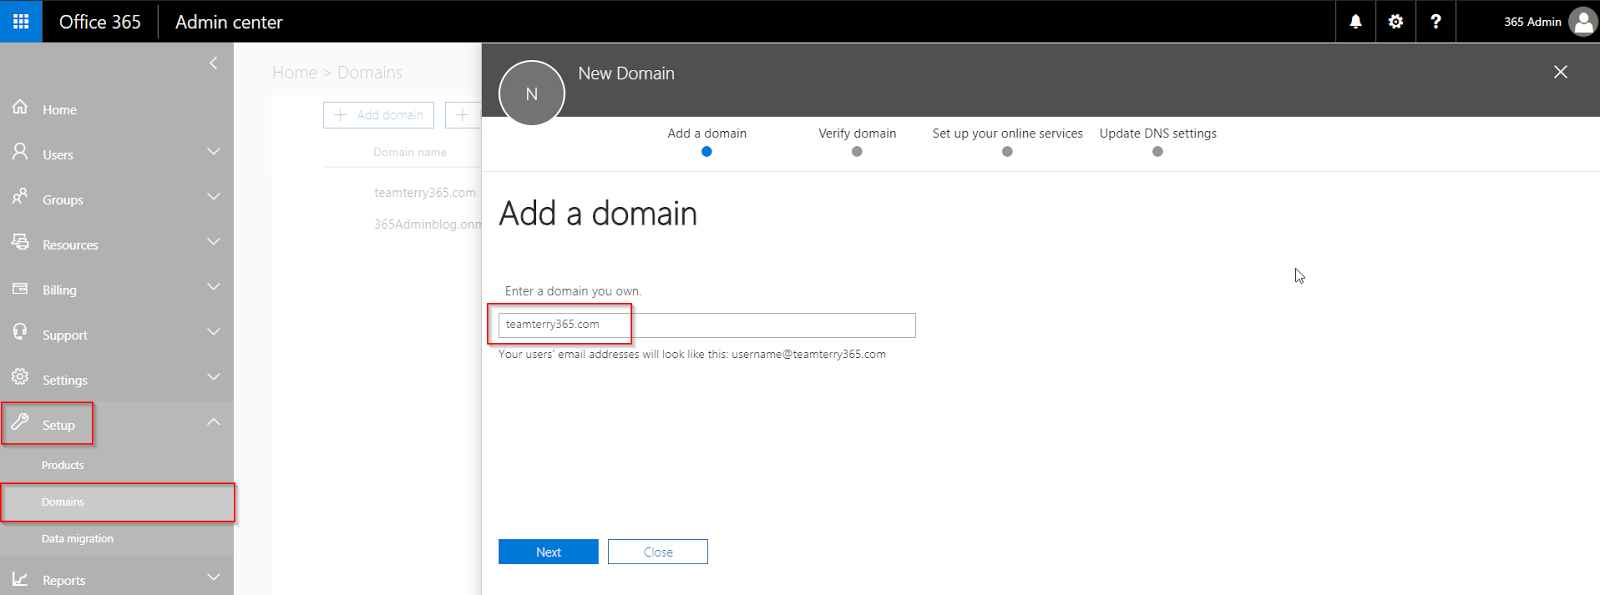 export office 365 contacts to a server